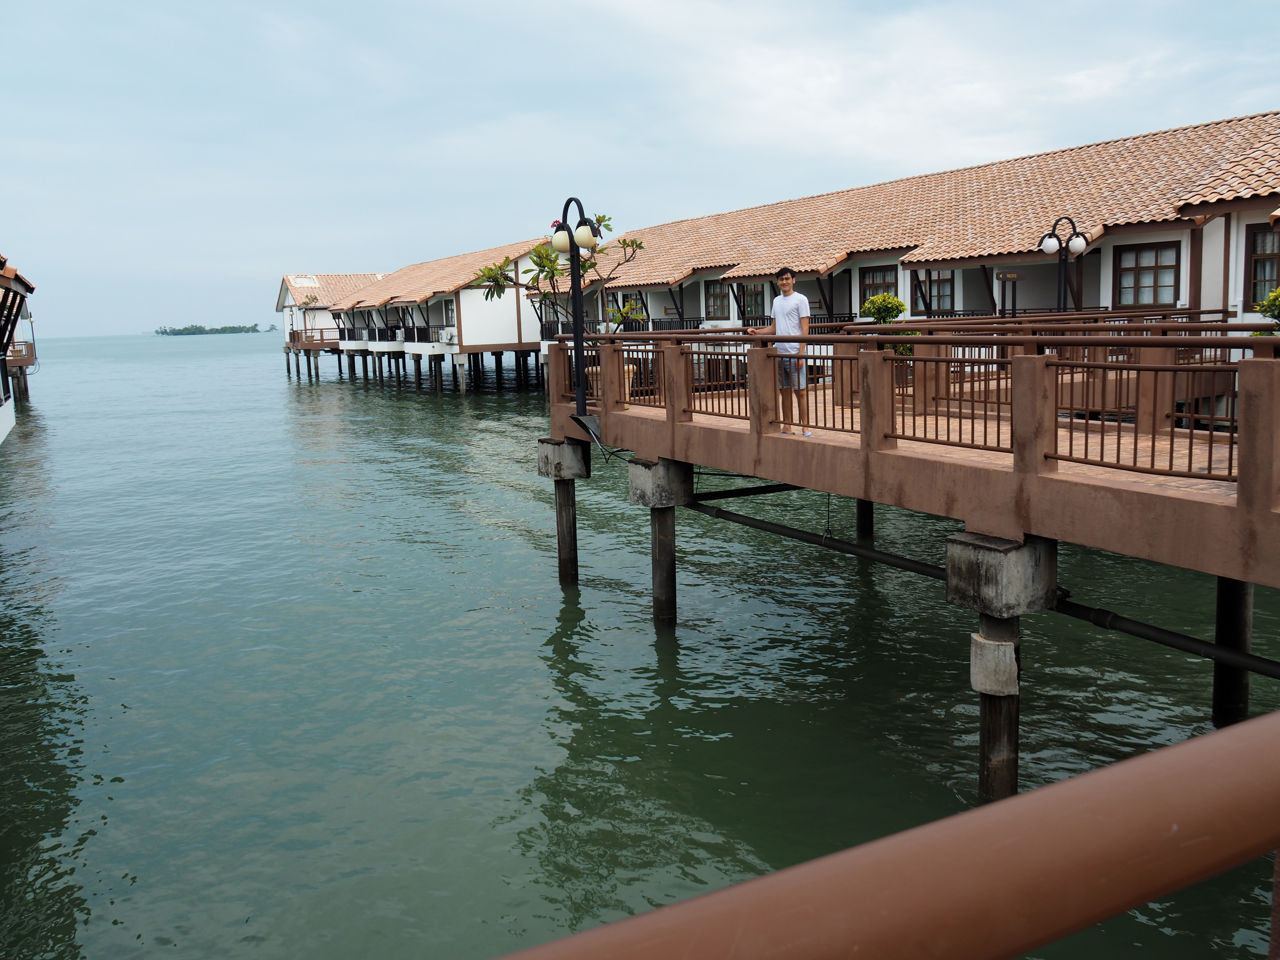 Chalets stretching out to sea in Lexis Port Dickson